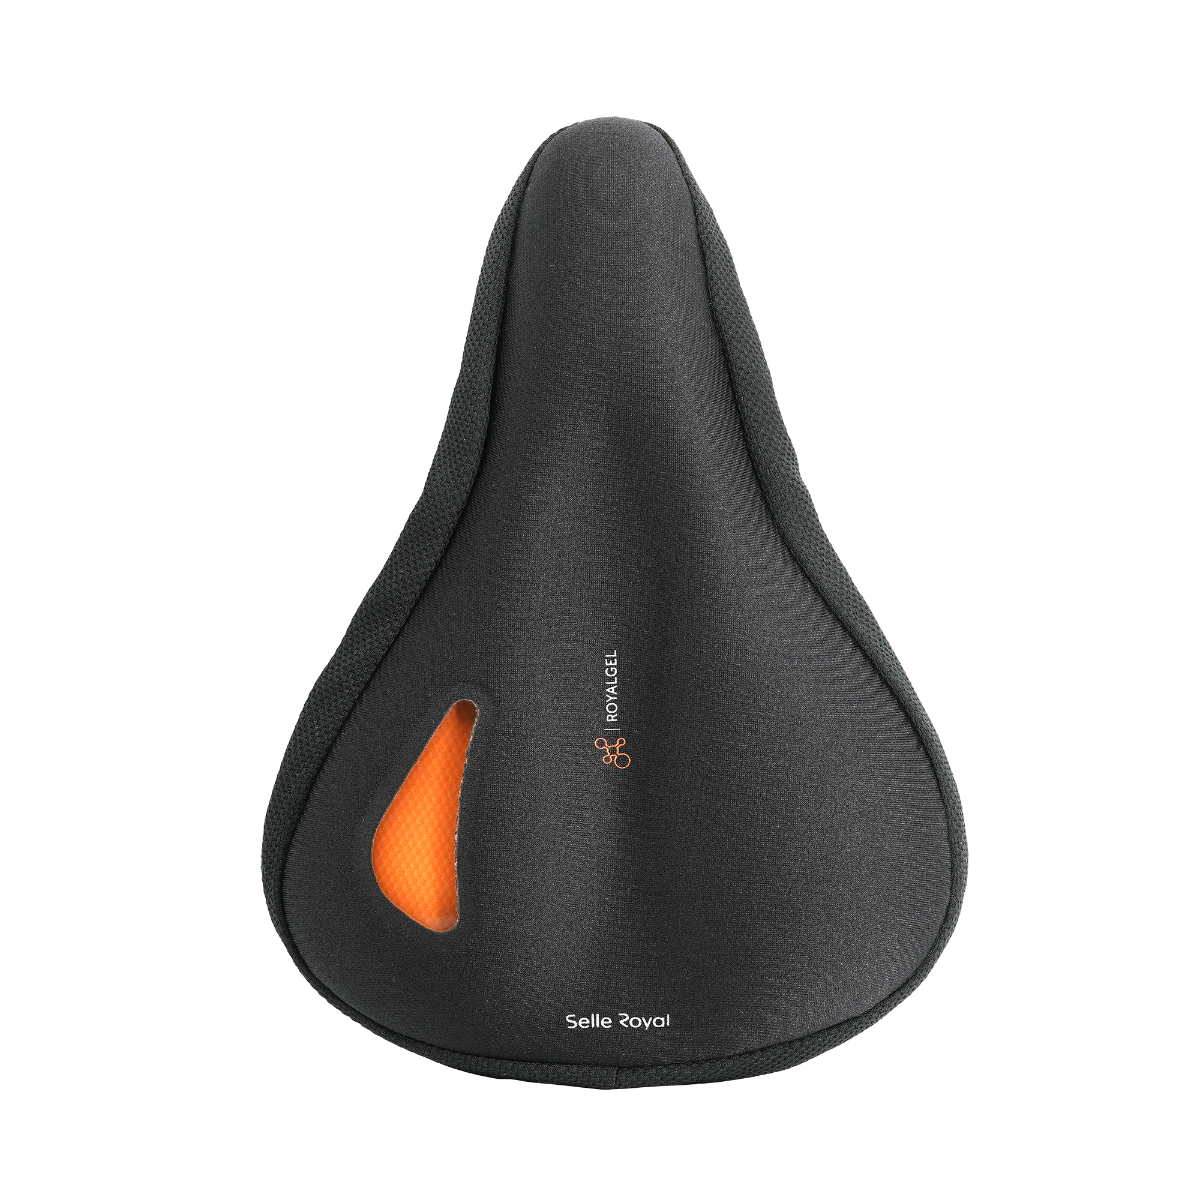 Royalgel Seat Cover Small - Selle Royal